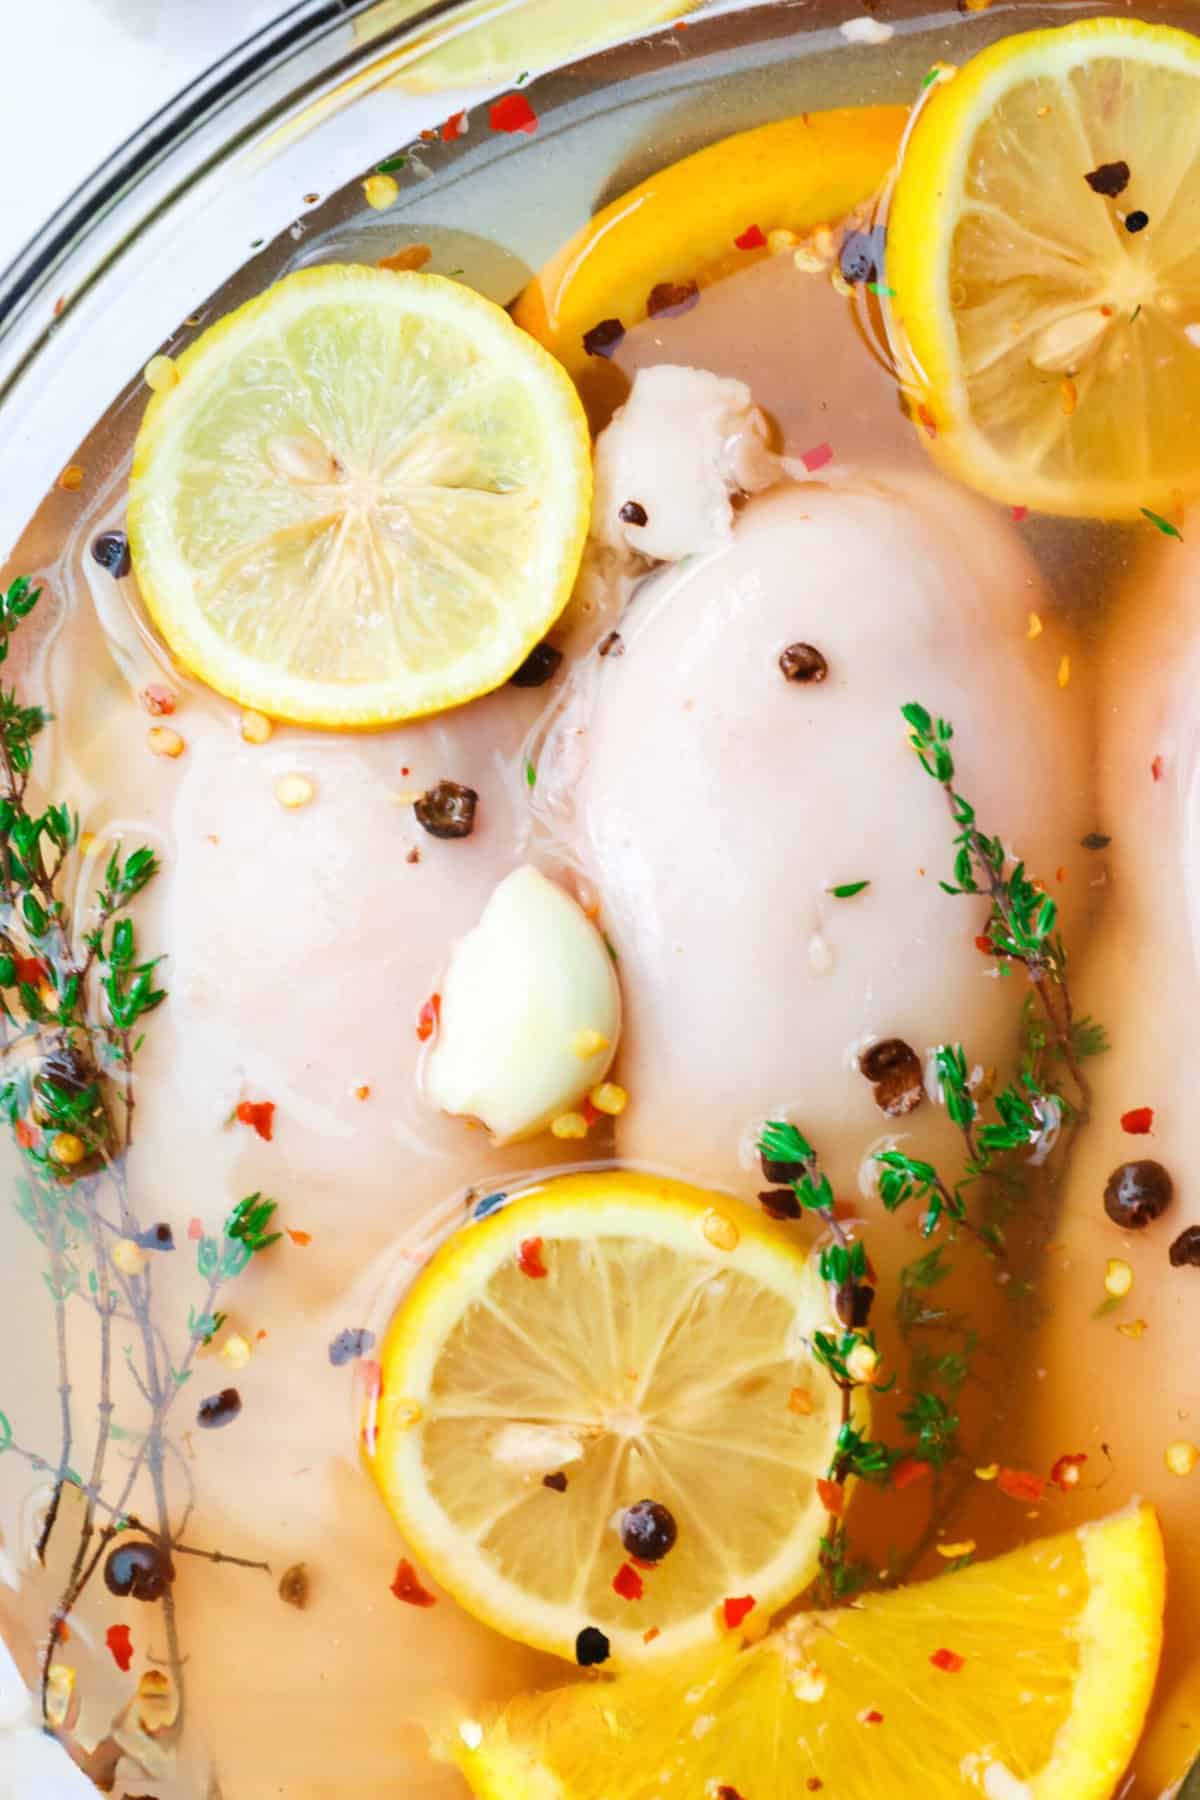 Orange, lemon, apple cider and herbs add flavor to the perfect brine for chicken breast